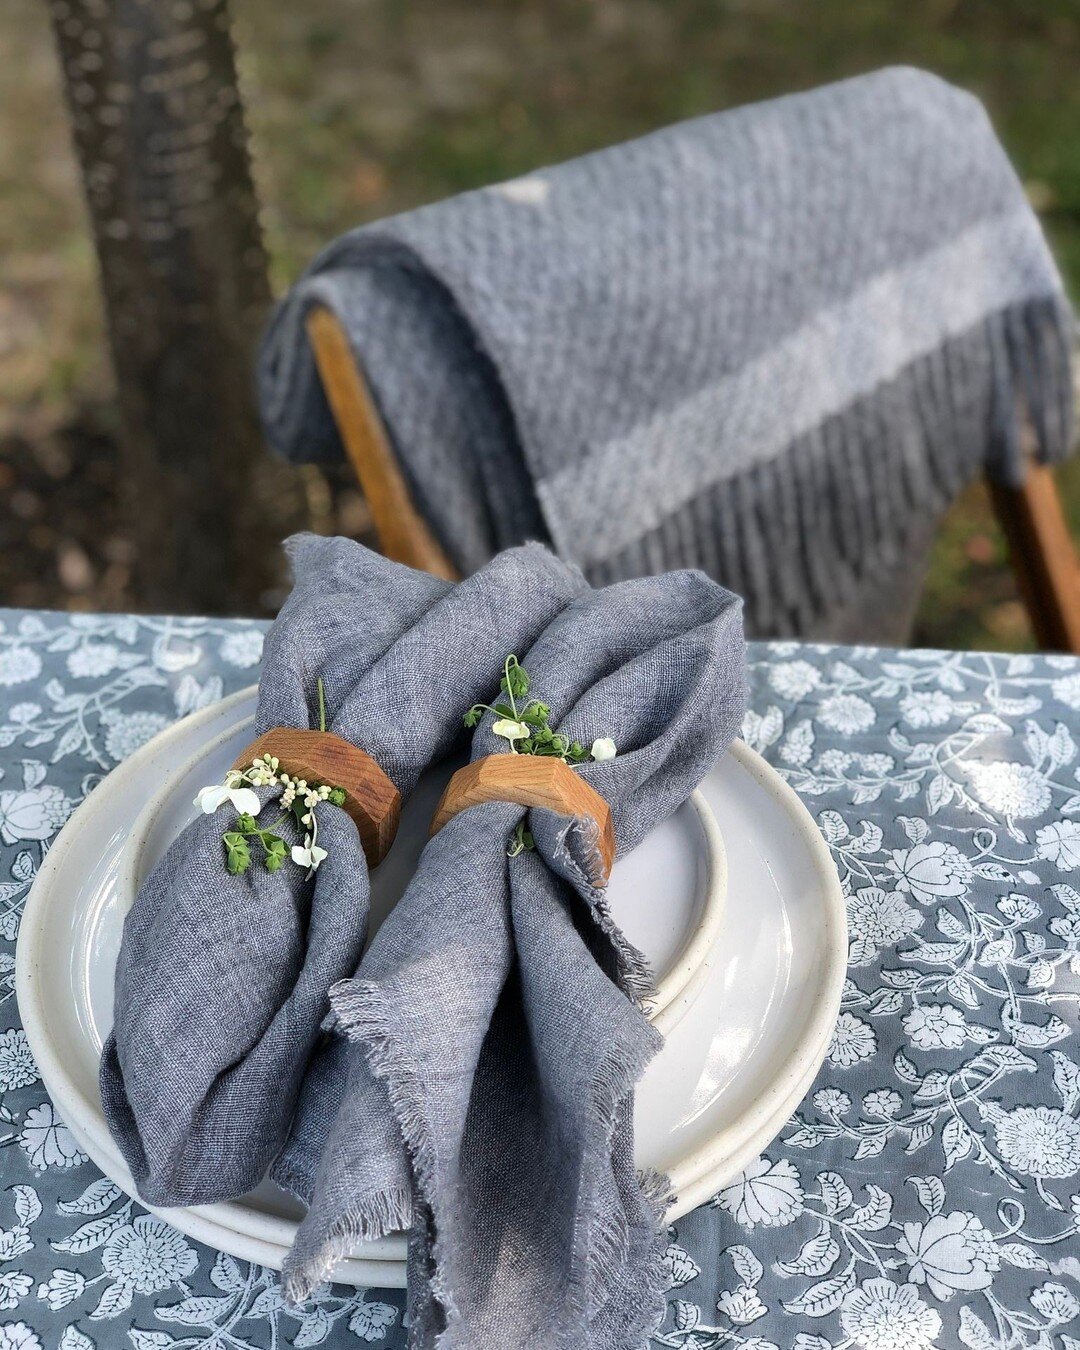 The best of both worlds! The weather is still inviting enough to dine outdoors yet the little chill in the air means we get to wrap ourselves in a wonderfully soft, cozy and oh so chic blanket that we just threw over the back of the chair because we 